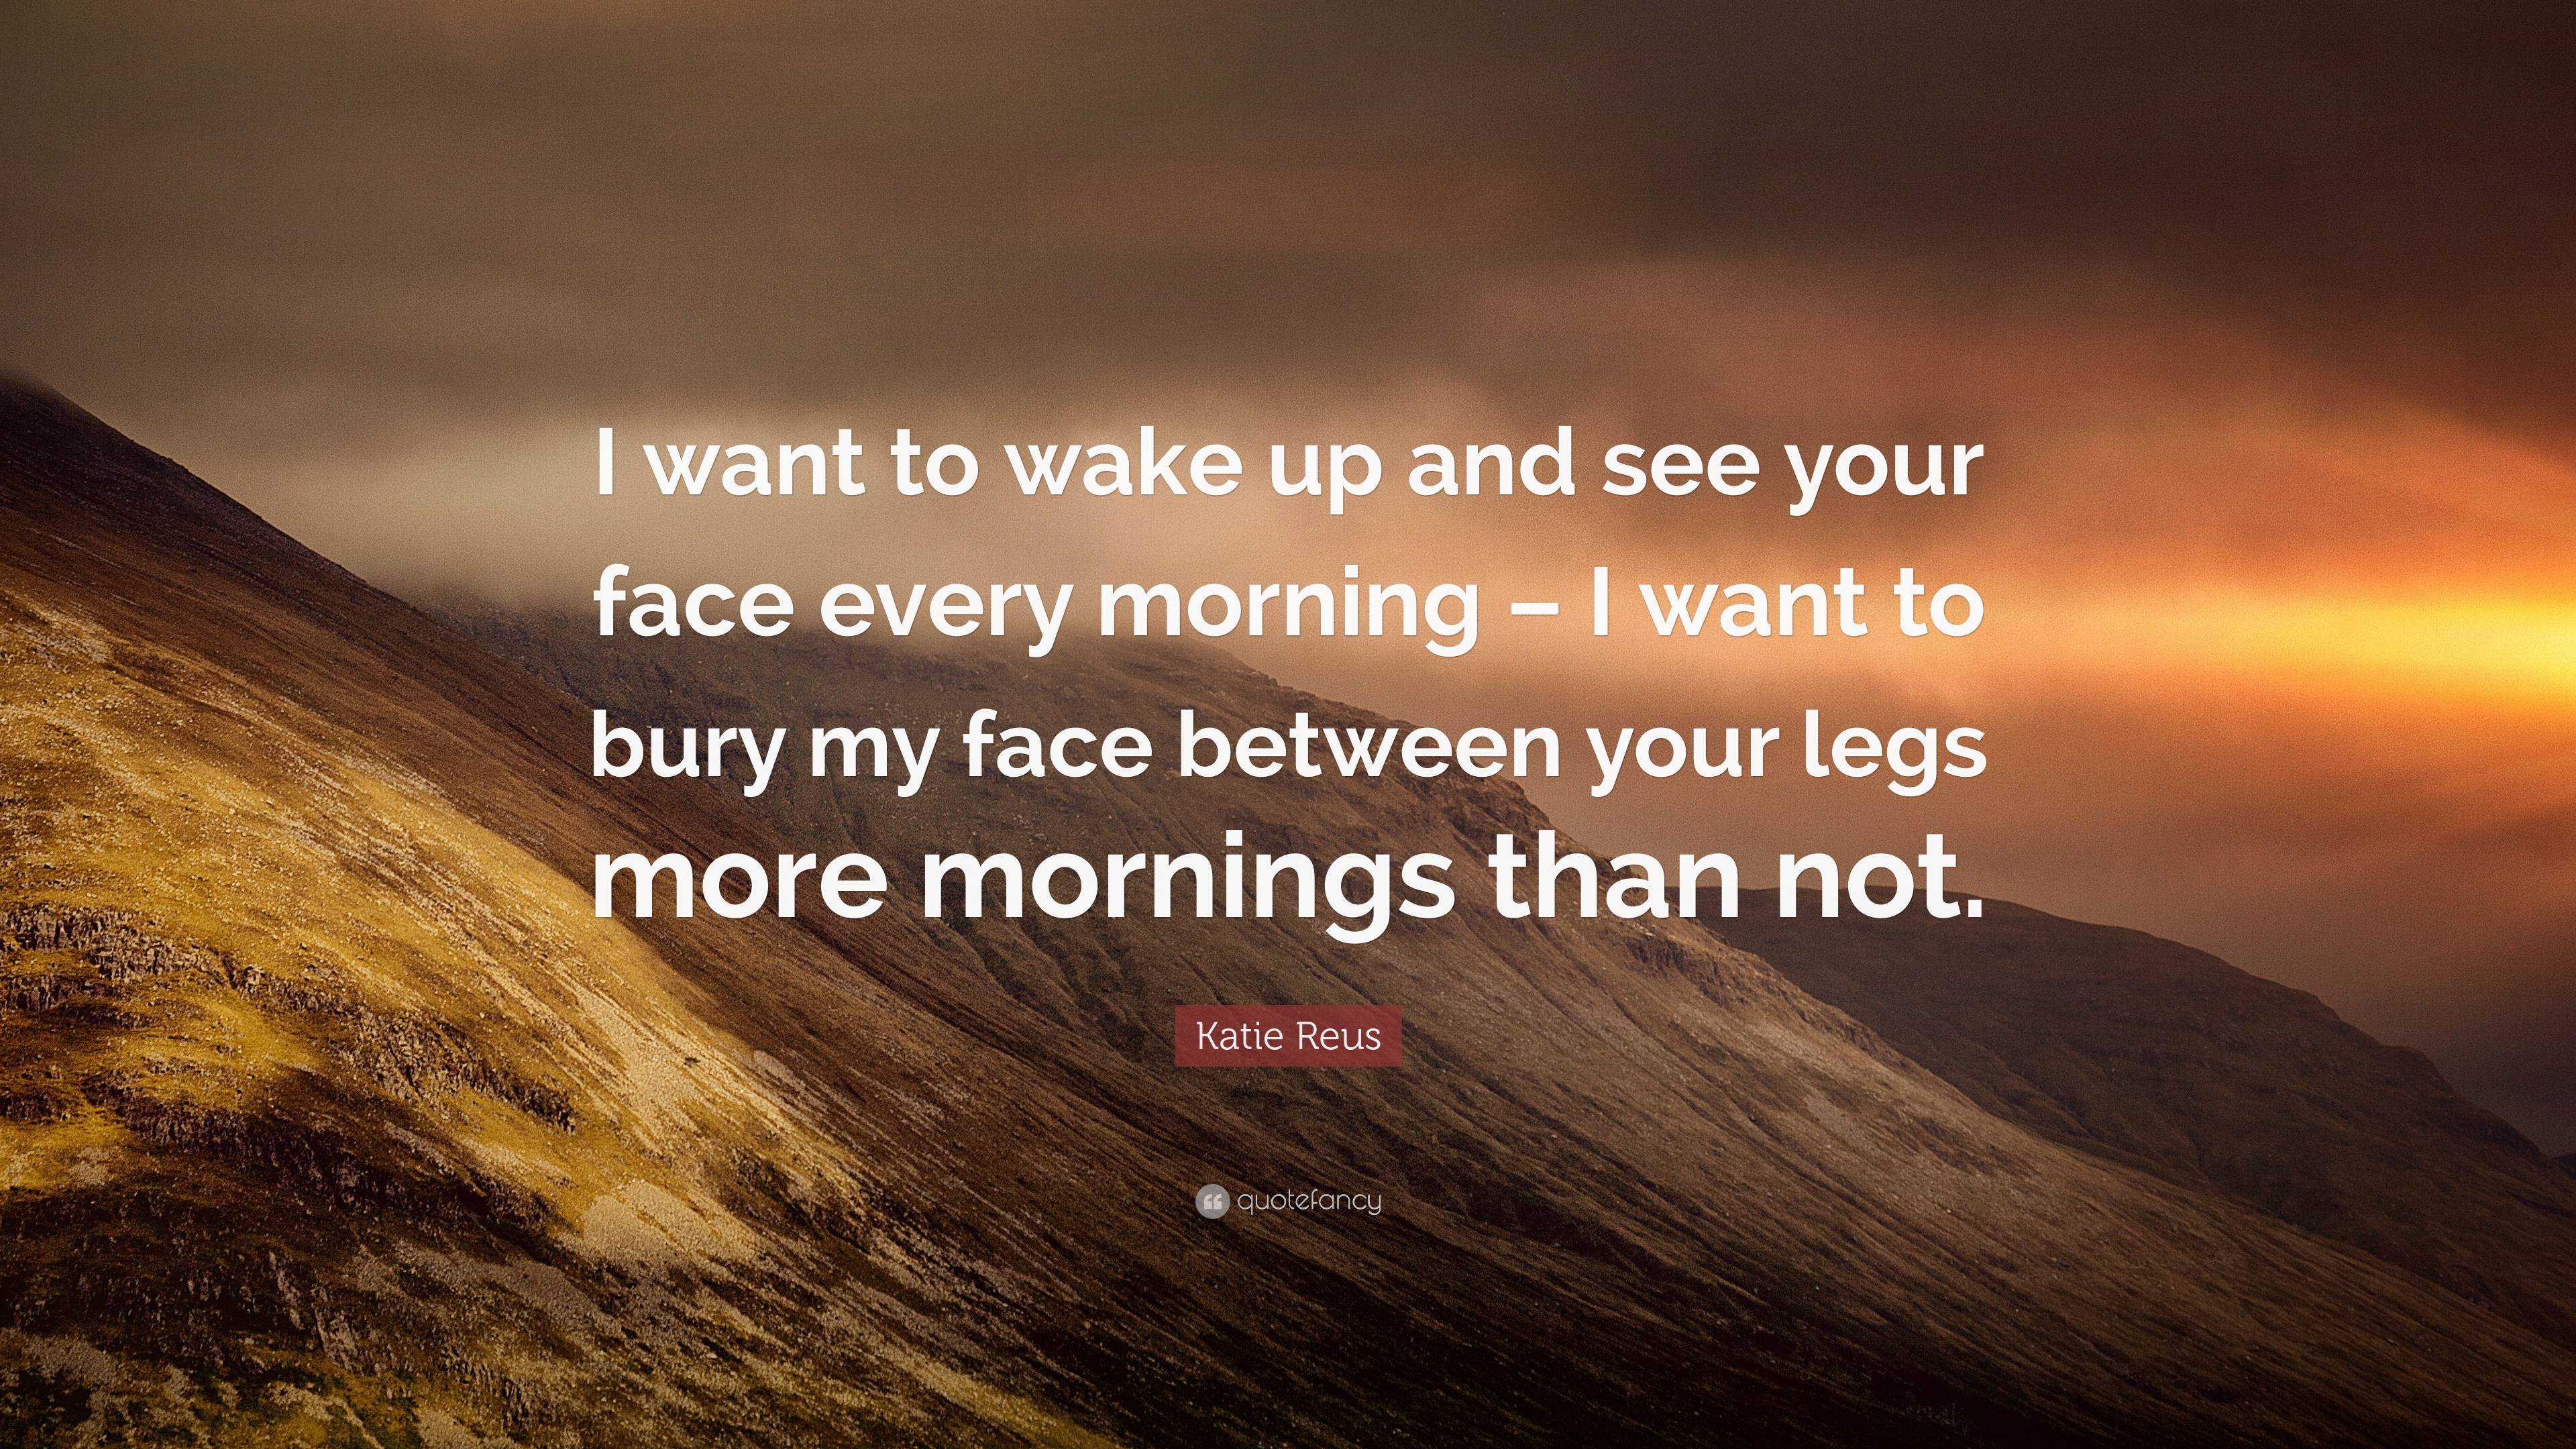 I want to wake up to find you between my legs!